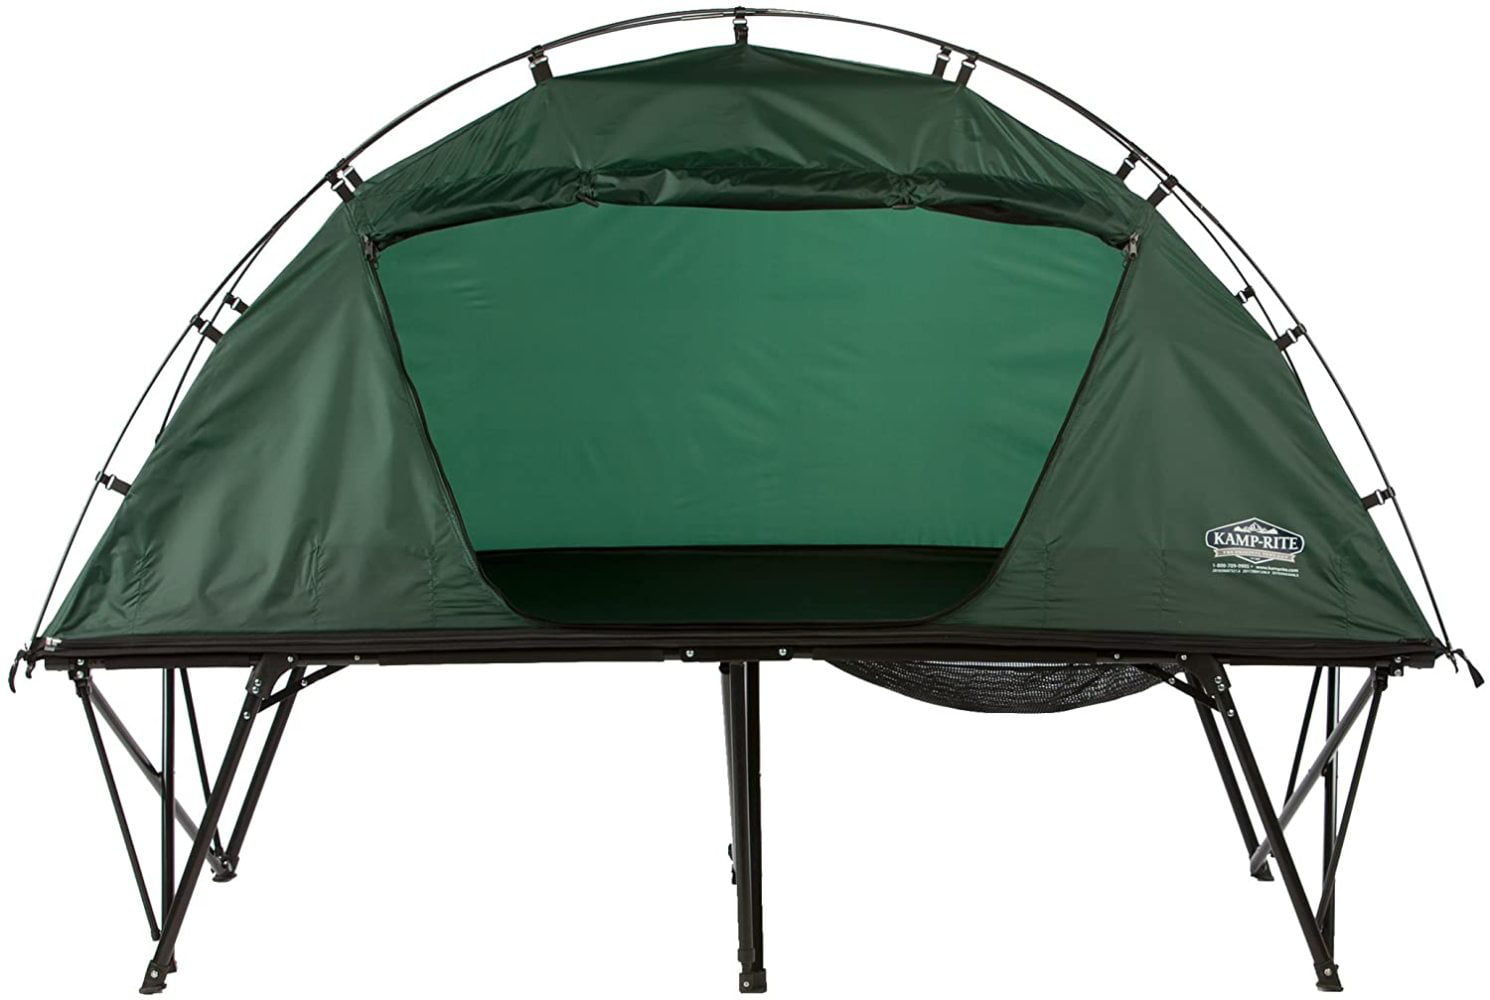 Camping Cot Tent Bed Lightweight 4 lbs only Foldable & PortableG2 GO2GETHER 